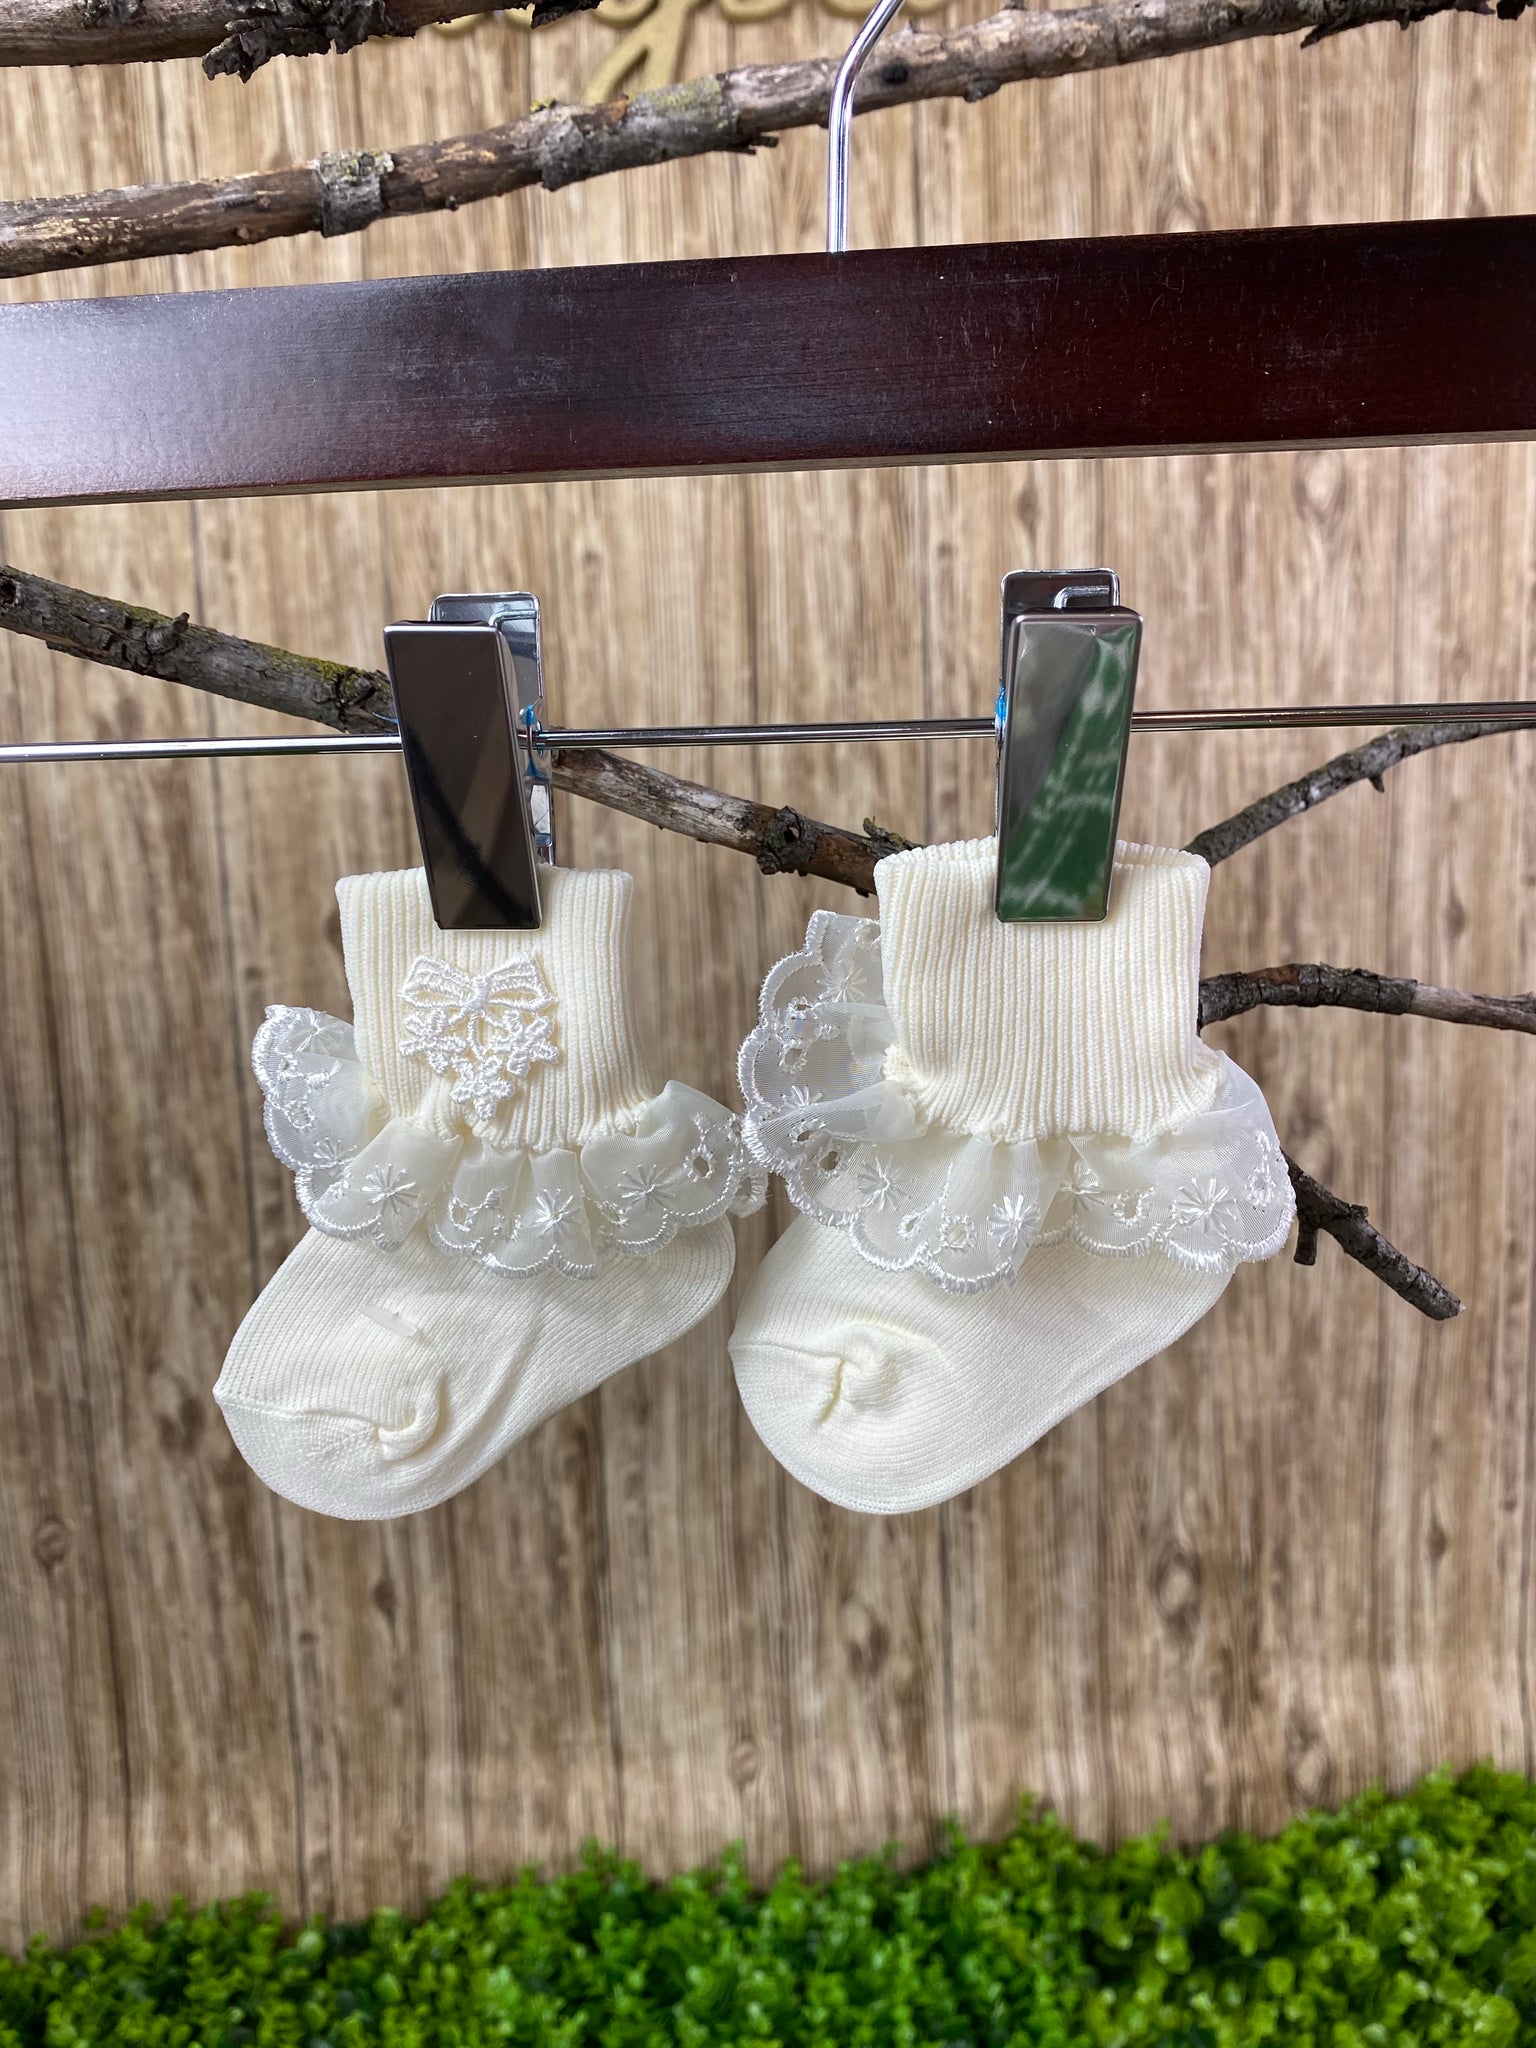 Baptism Socks - Ivory Socks with Flower  These custom ivory socks are detailed with beautiful, embroidered flowers and lace along the edge.  These are perfect for your little baby girl's outfit!  These socks are available in a newborn size.